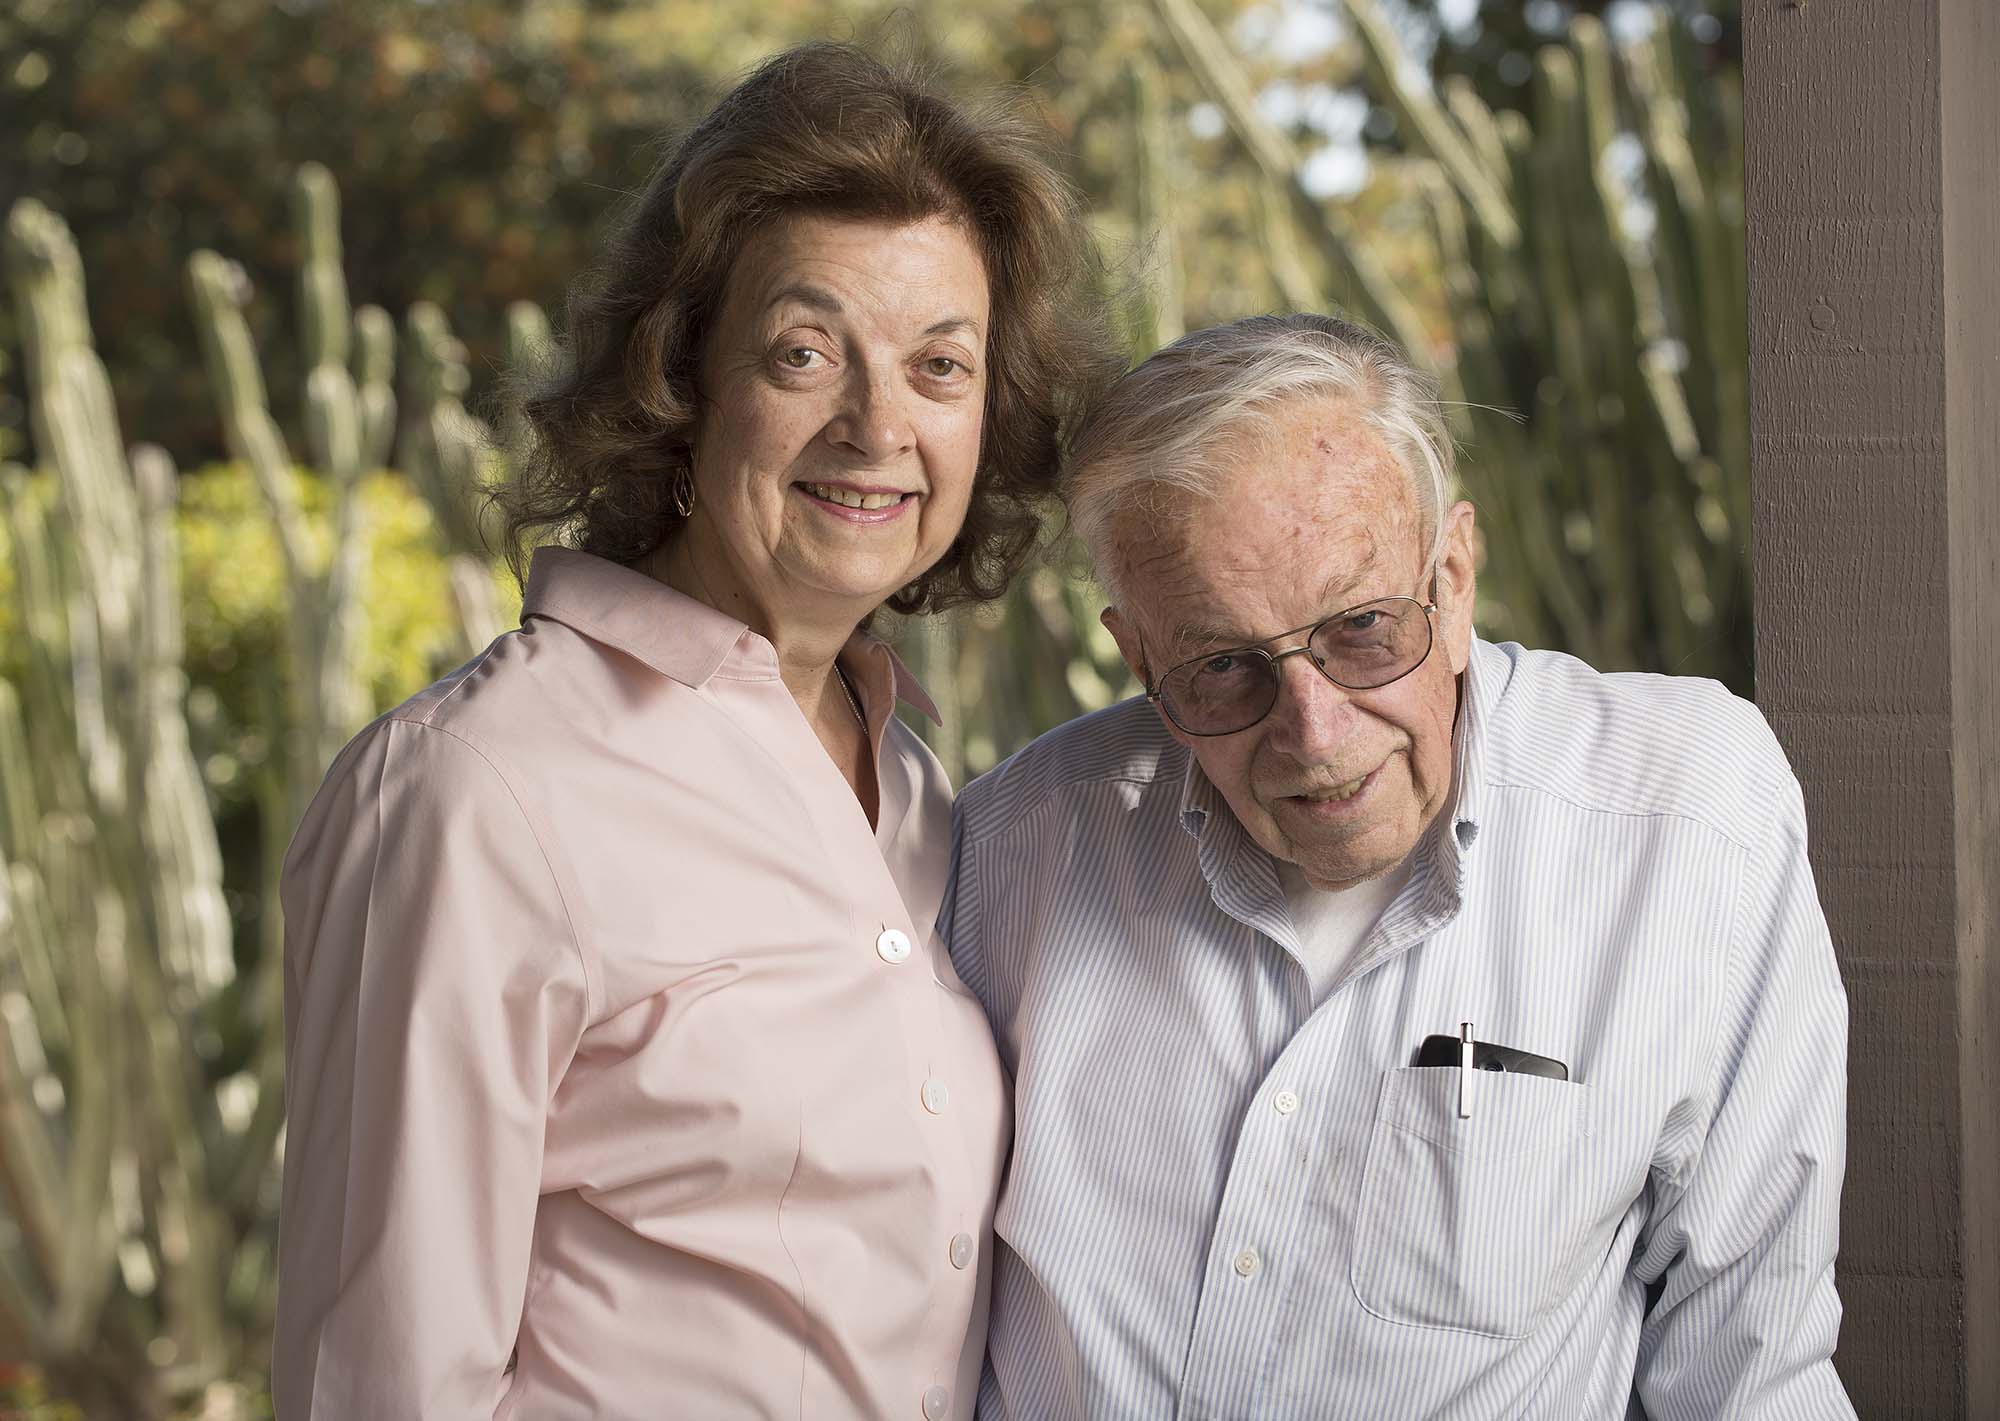 CPP engineering professor emeritus with Jack O'Neil with his wife Mary